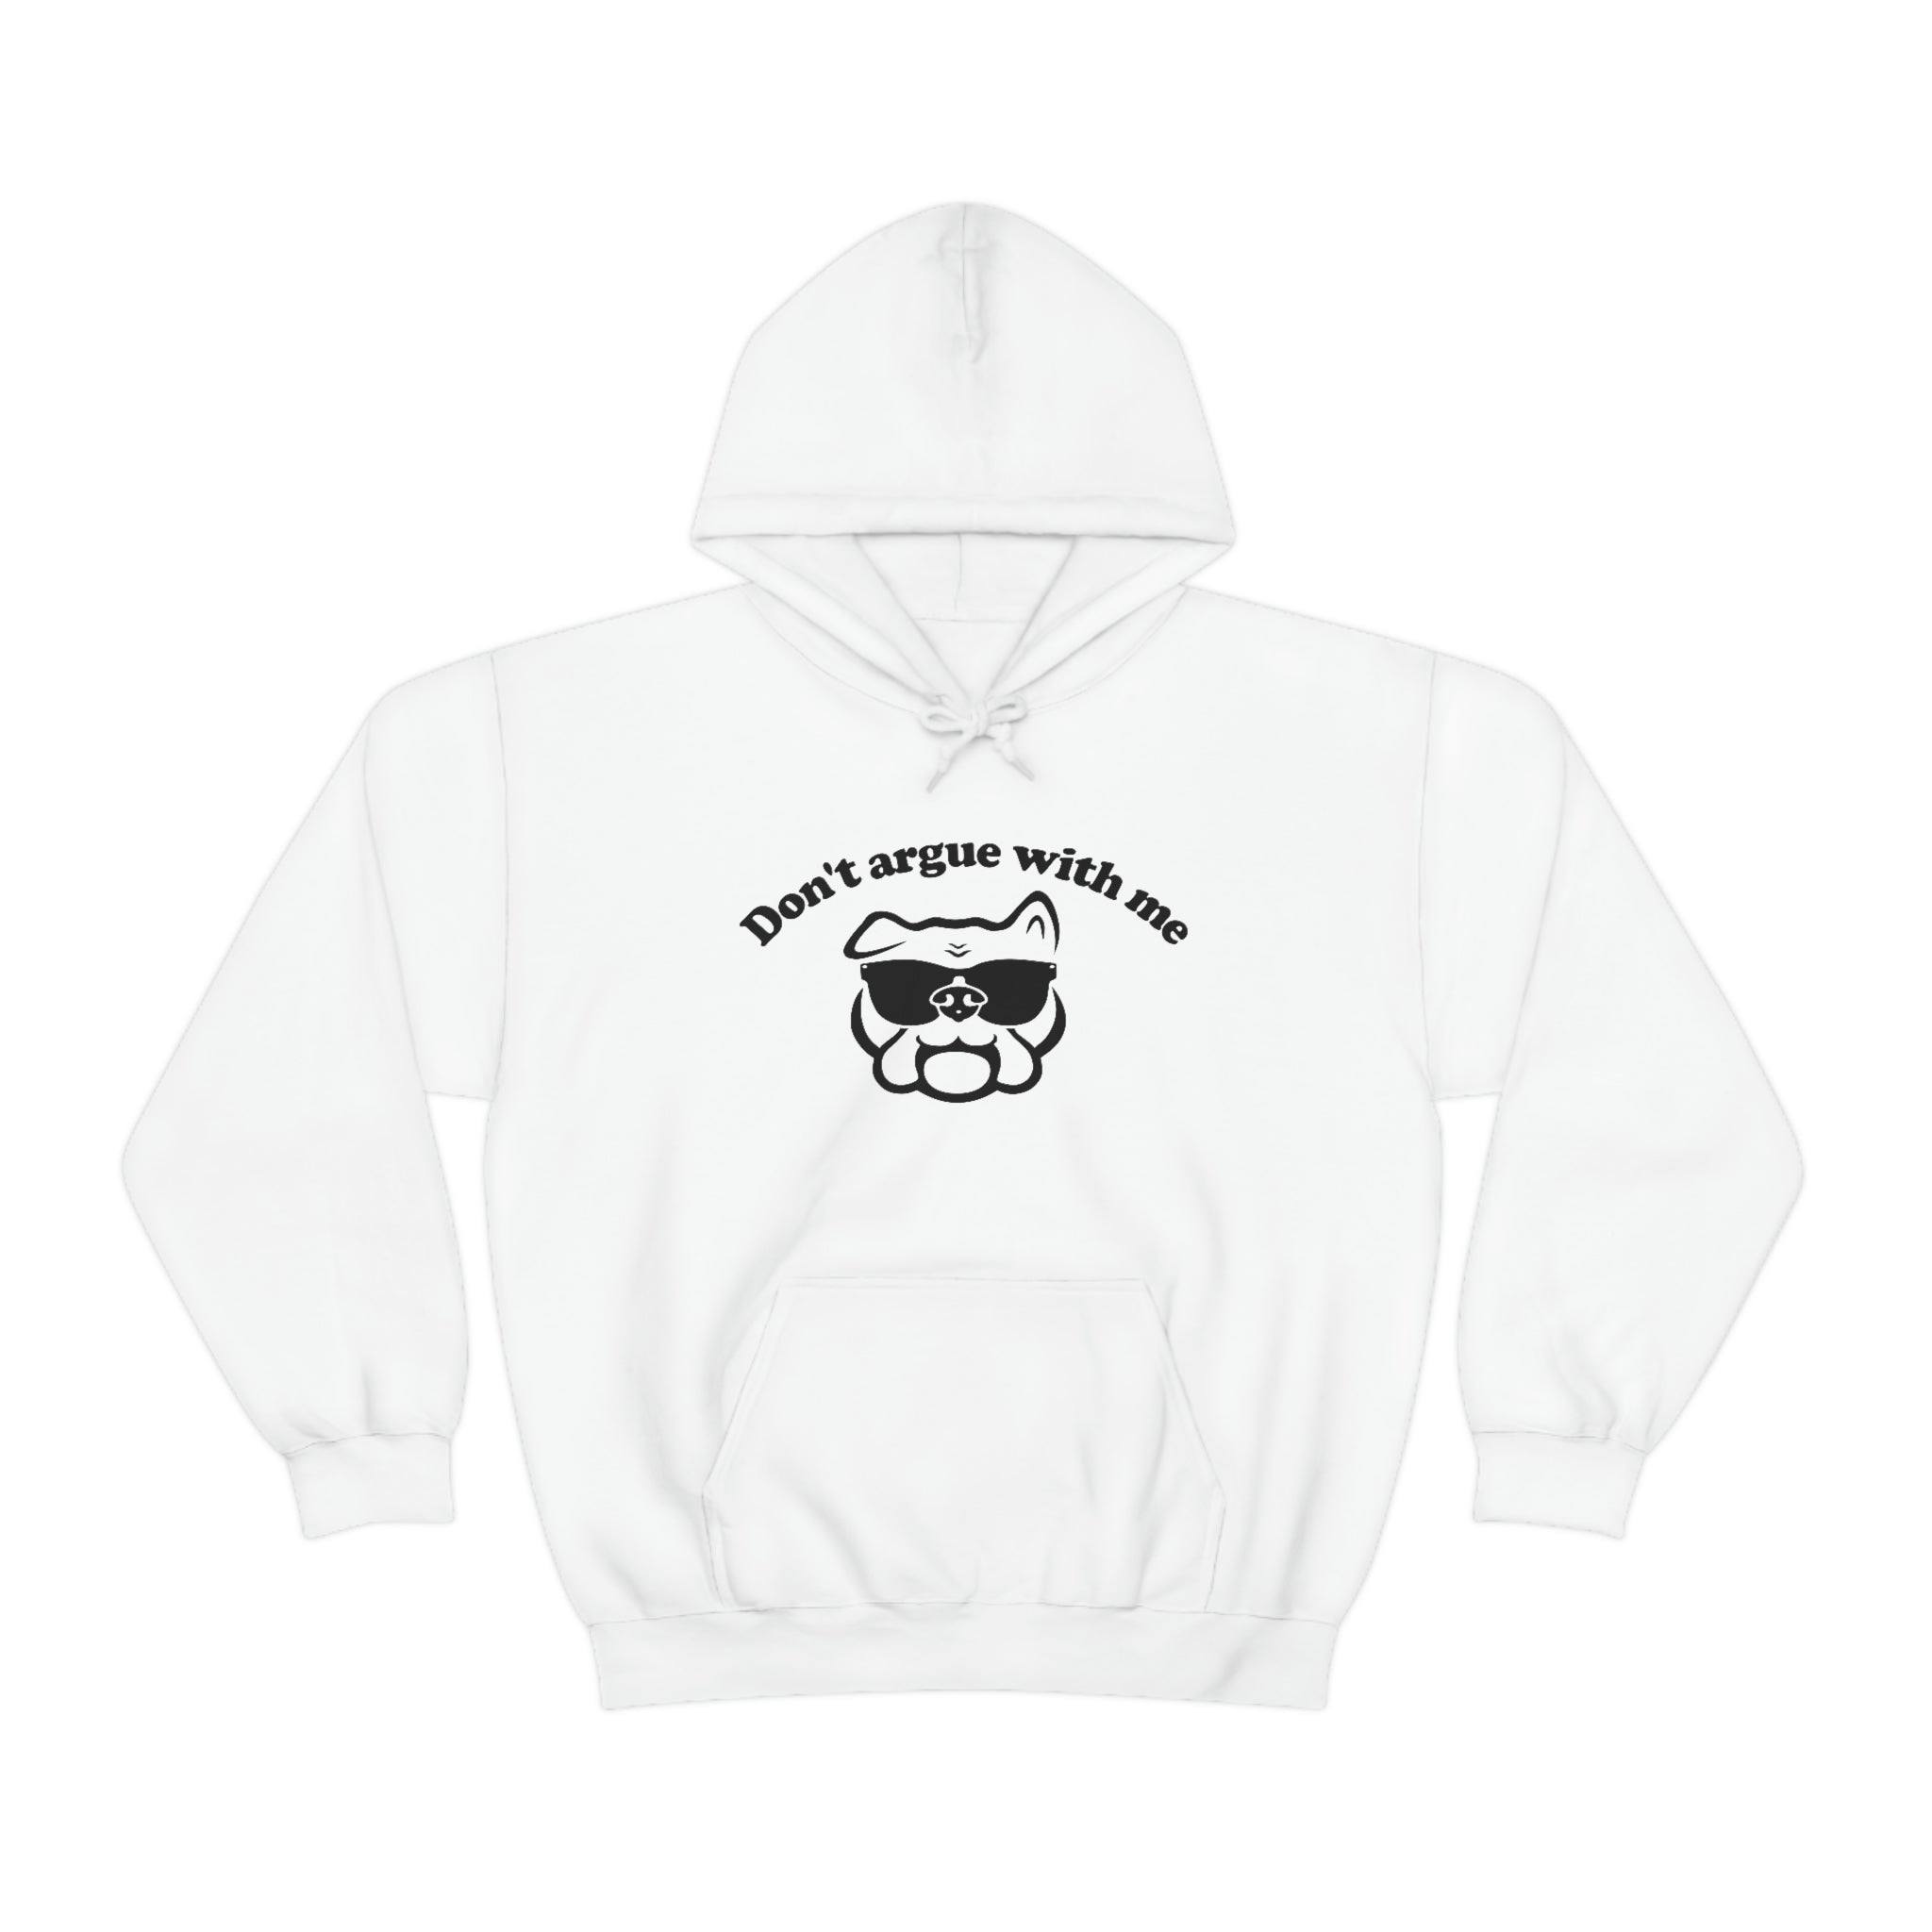 Don't Argue With Me / Black Graphic Hoodie